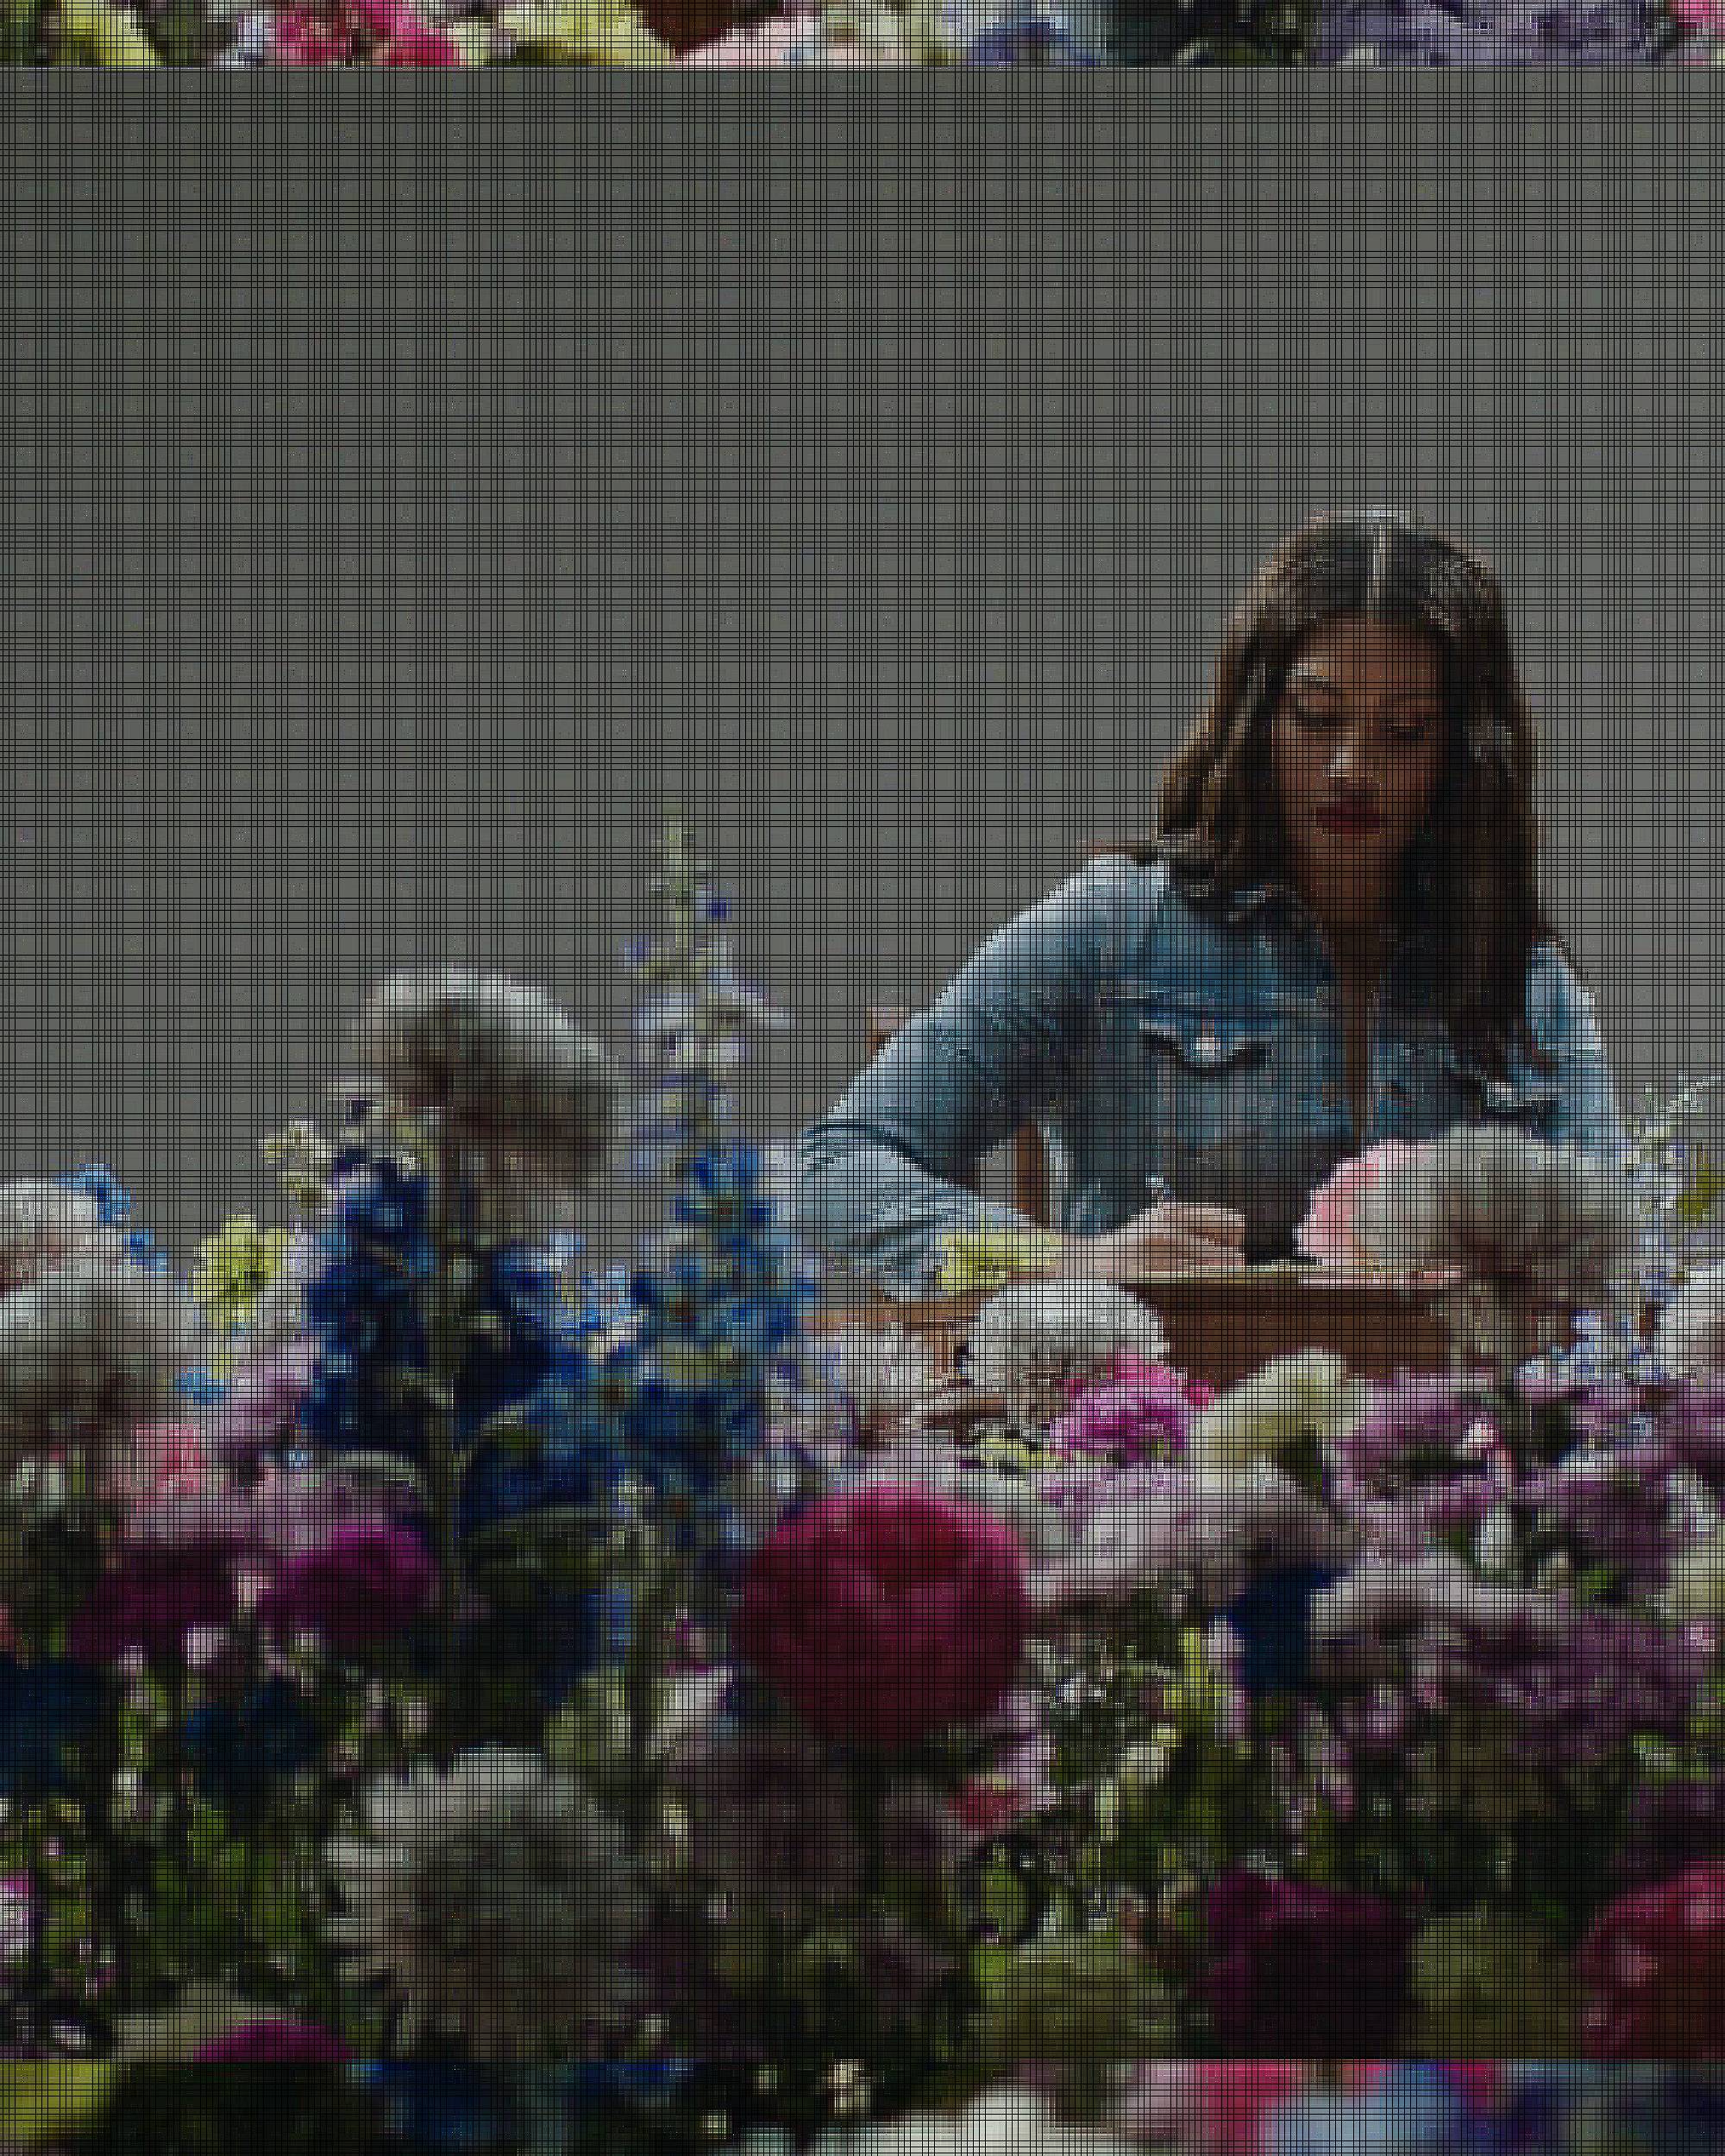 Image of Leyna Bloom sitting at a wooden desk, wearing a denim western shirt, writing on a stack of papers while surrounded by colorful flowers.